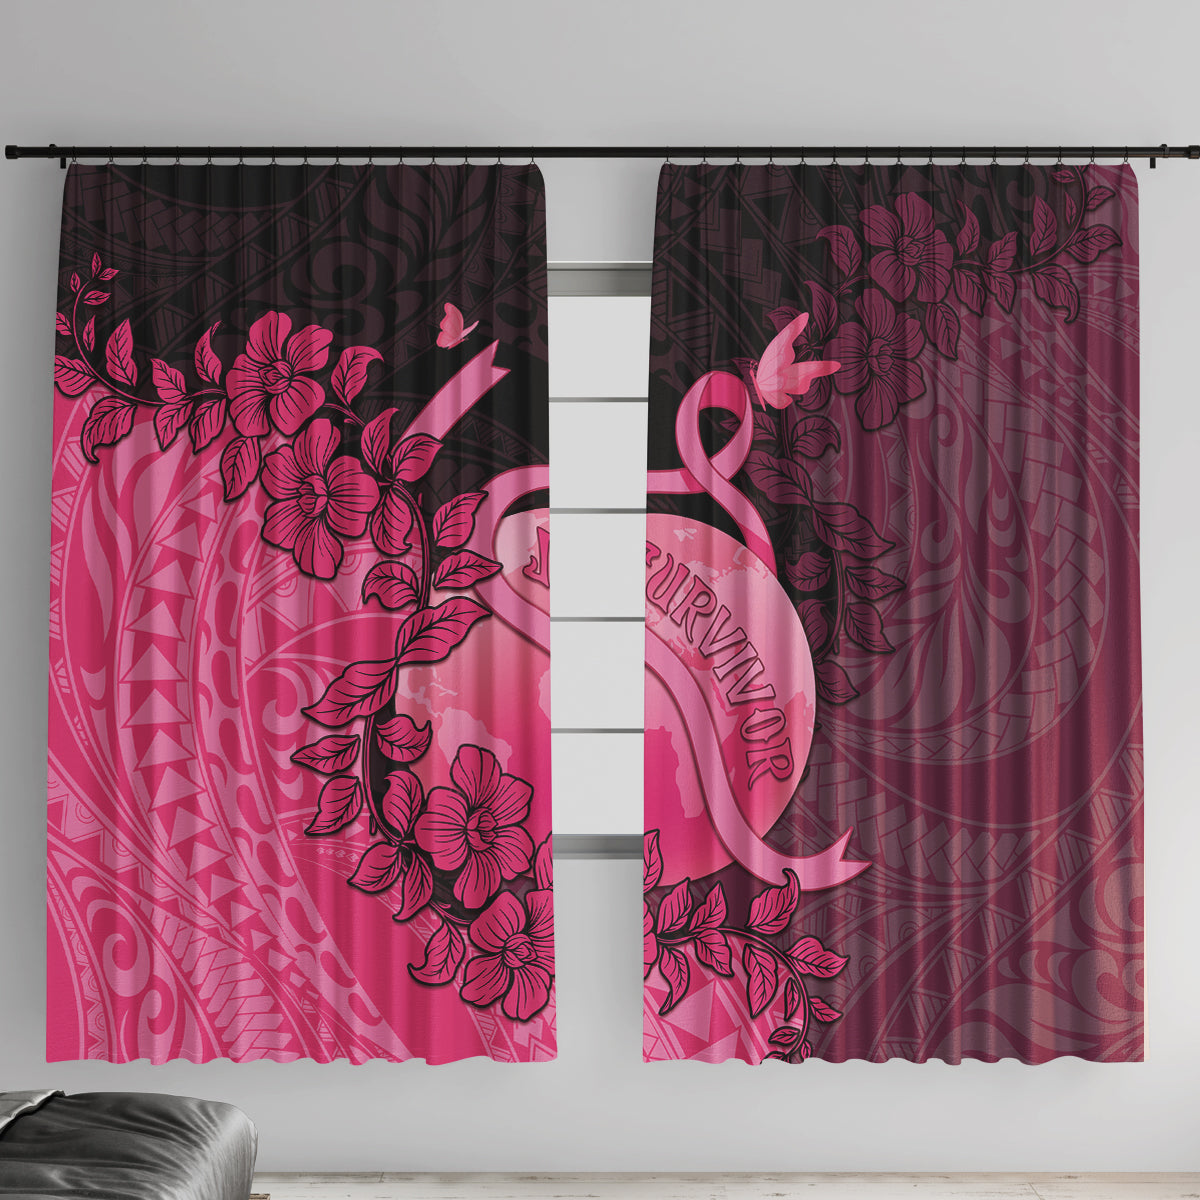 Cancer Fighter Window Curtain I Beat Cancer